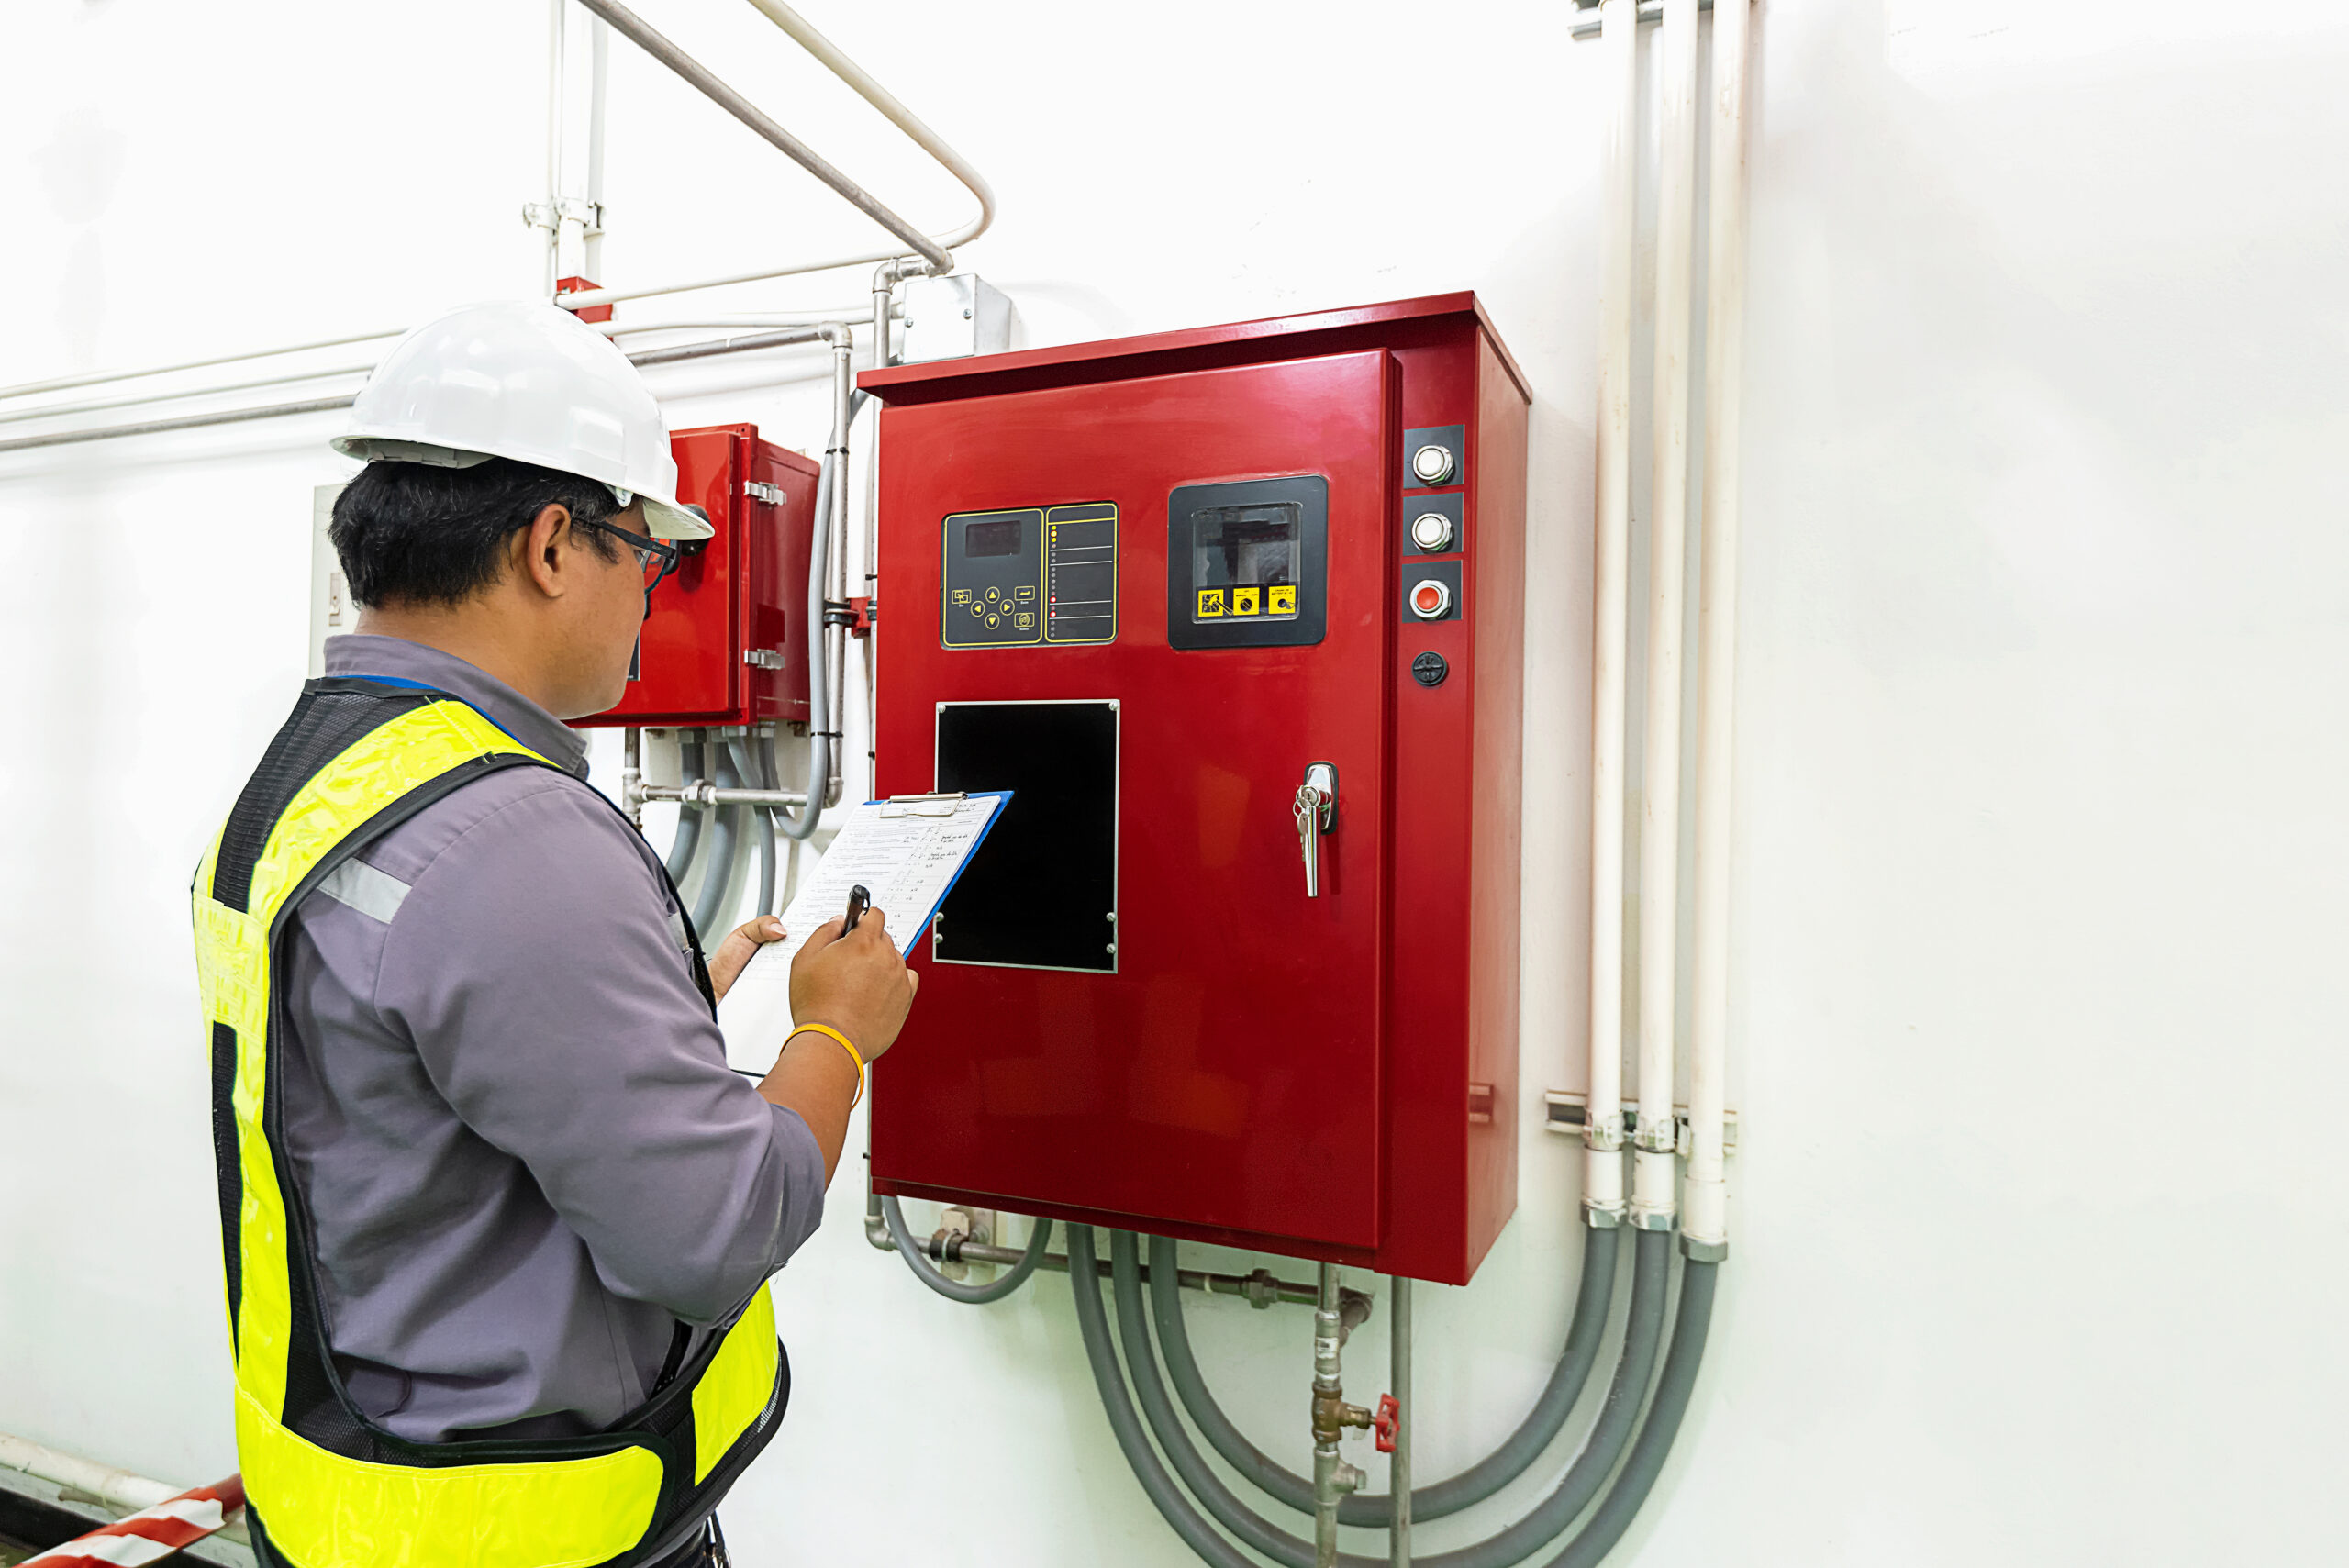 Engineer check generator pump controller for water sprinkler piping and fire protection system.